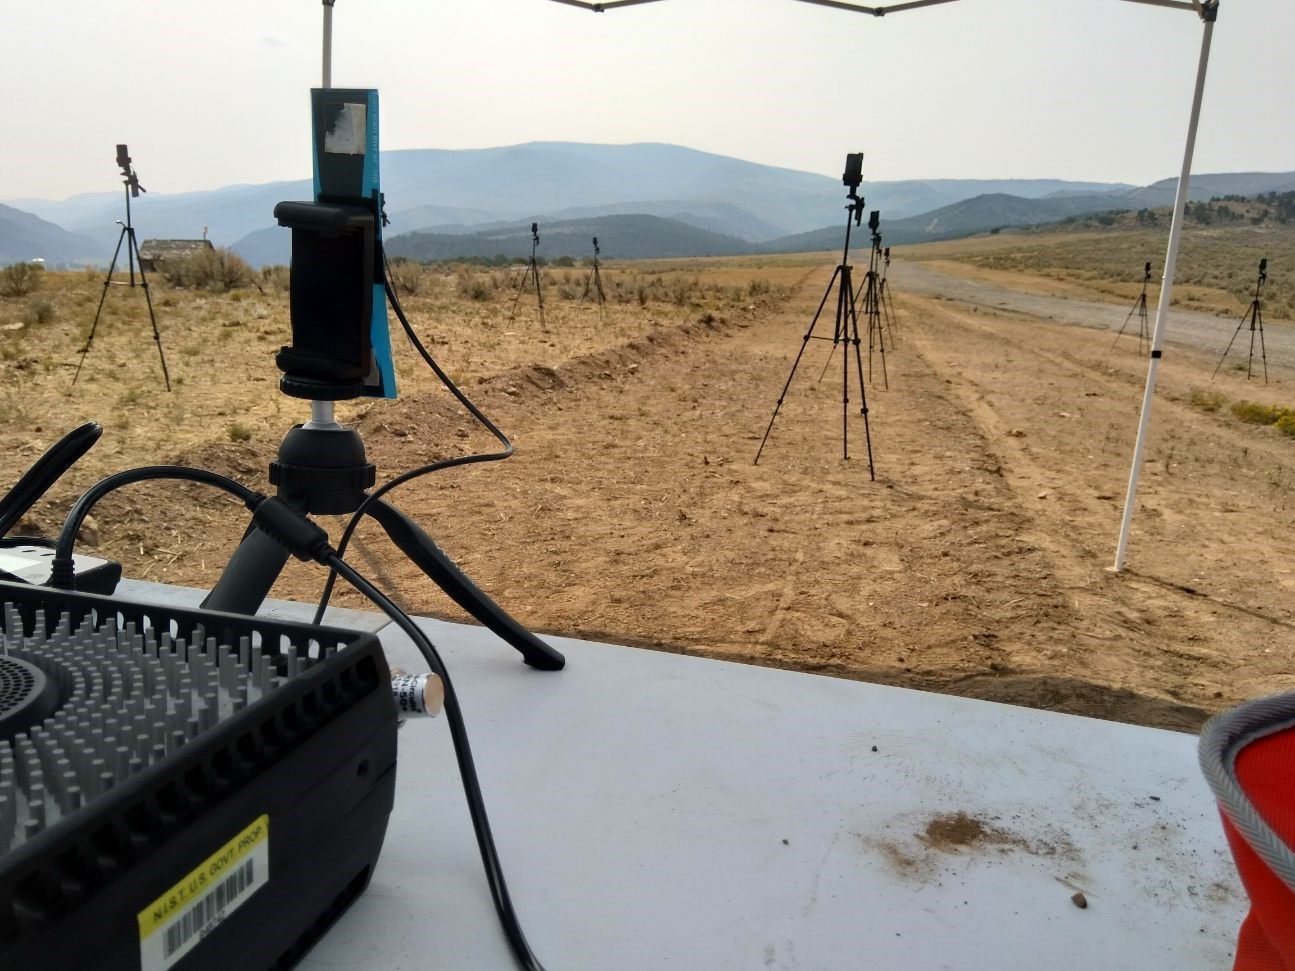 radio equipment on a table in front of cell phones mounted on tripods in a field